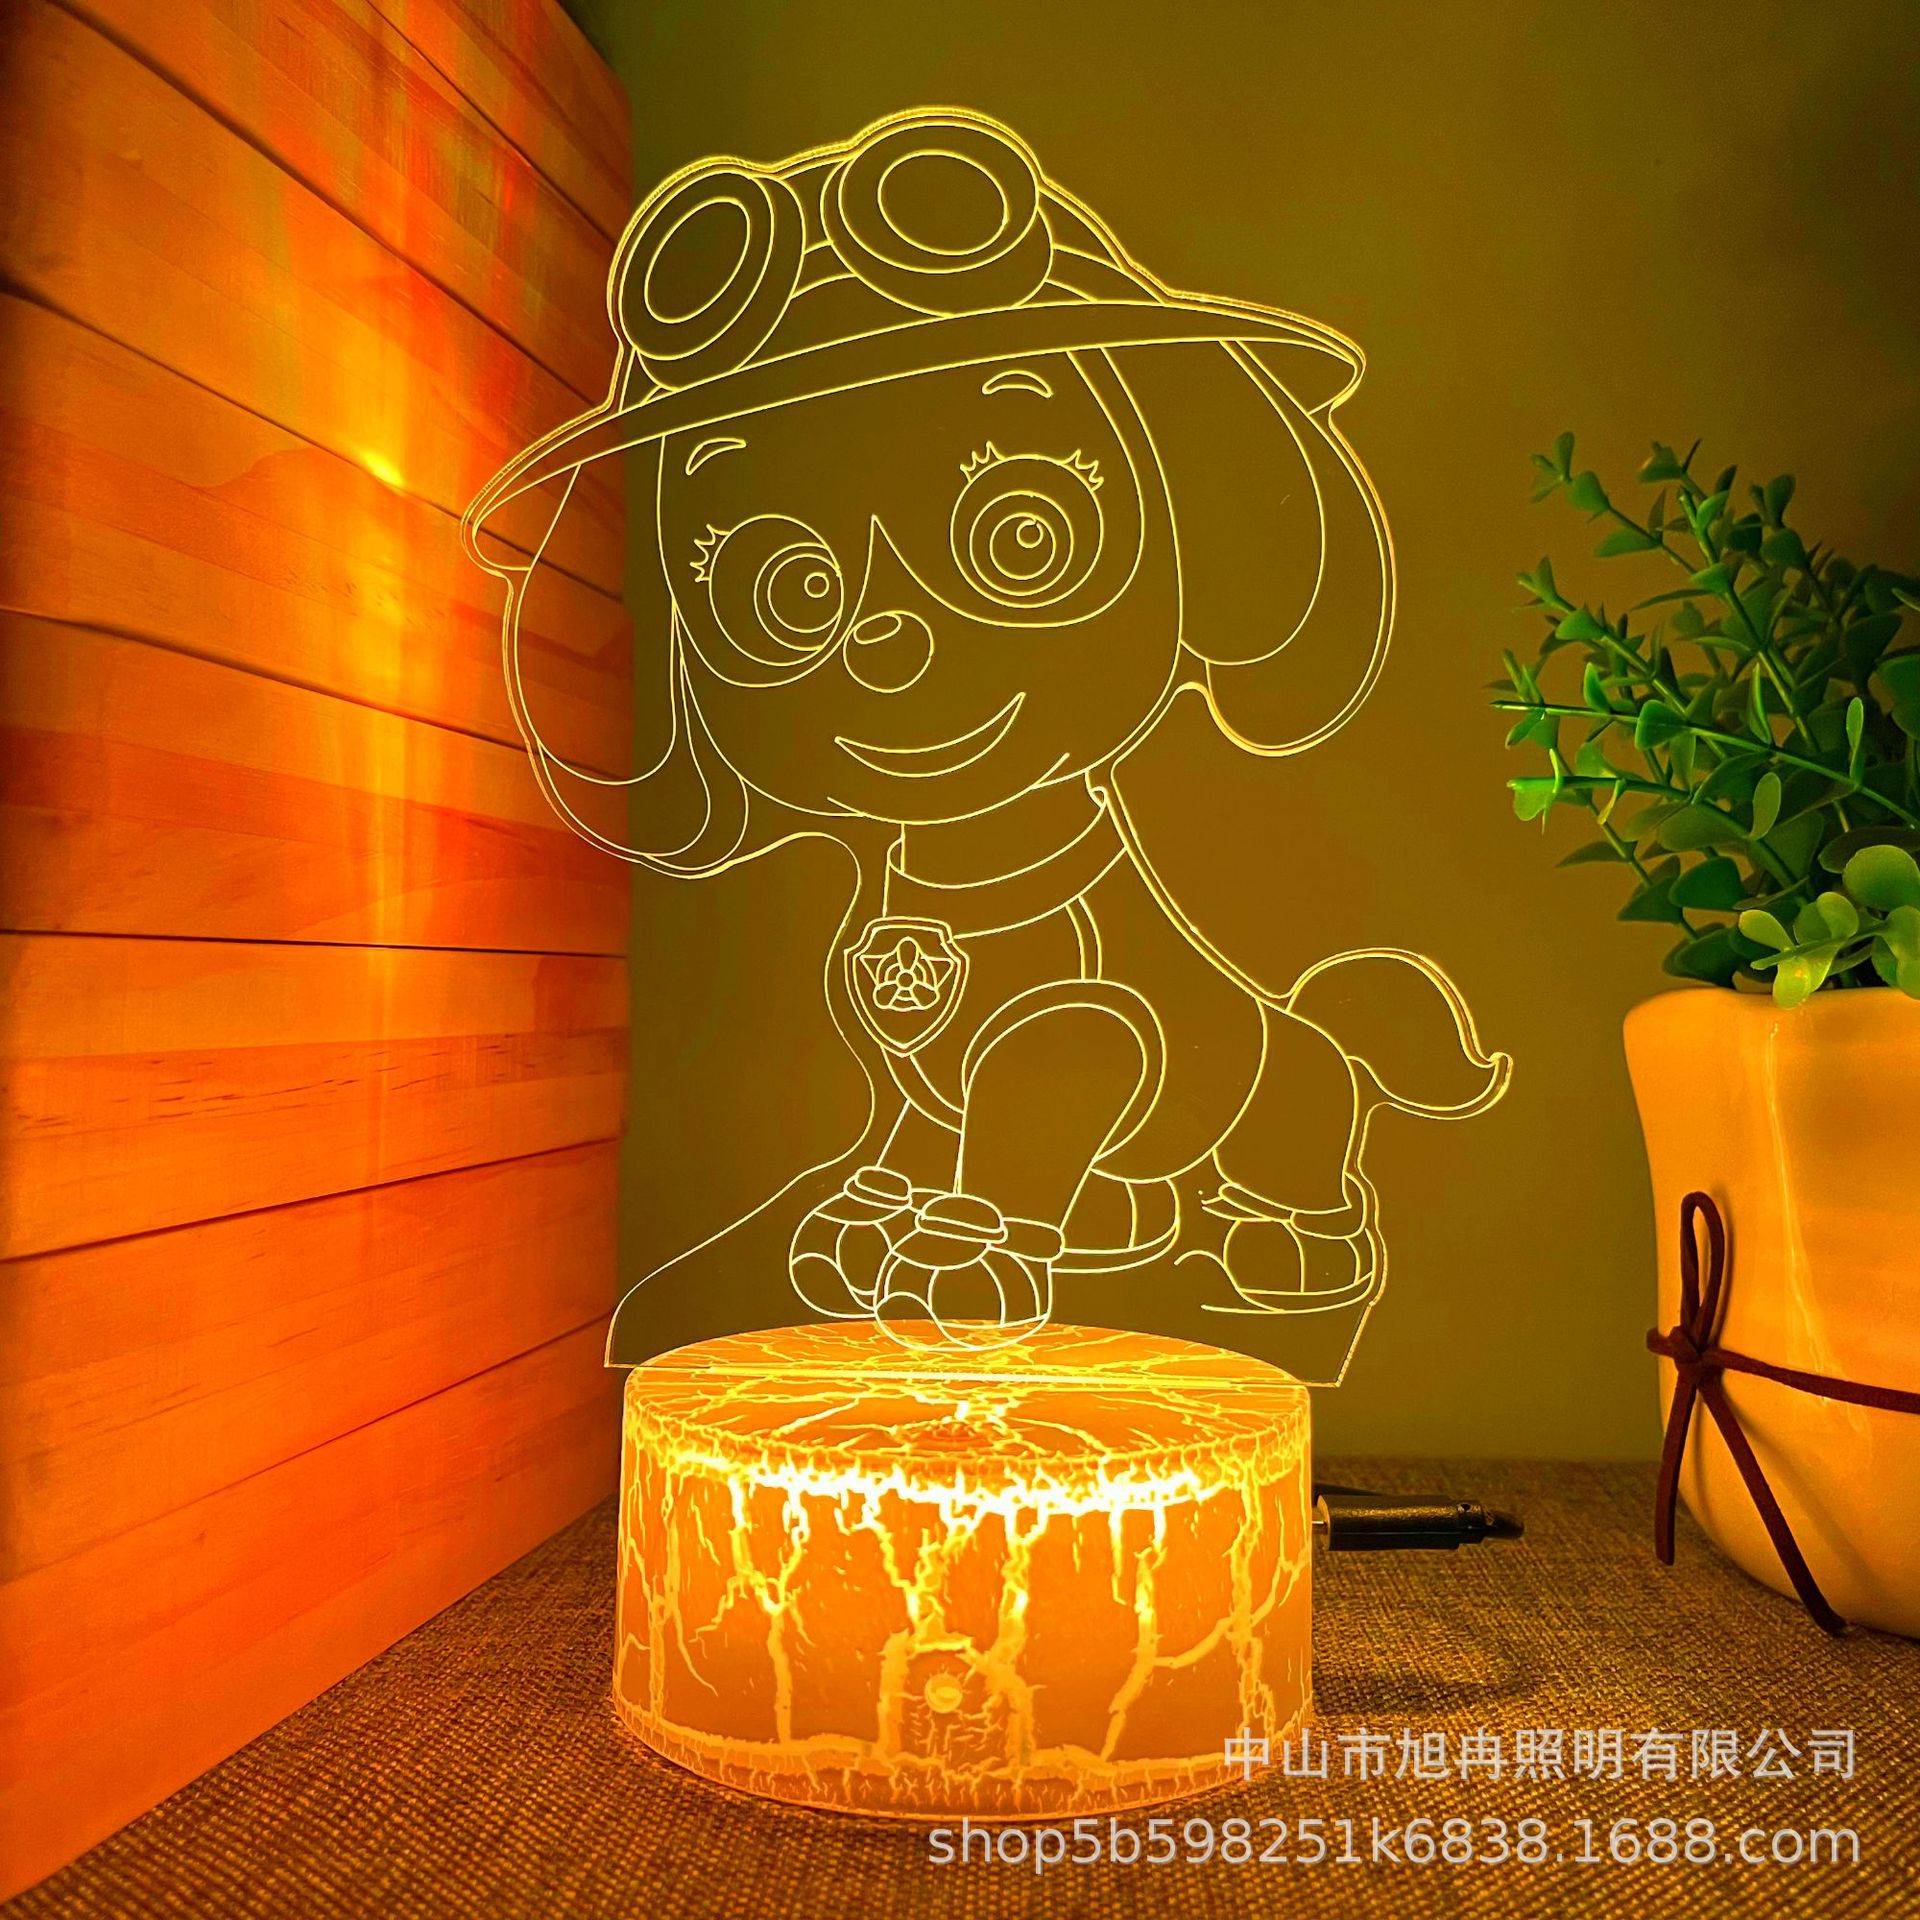 Cross border hot selling 3D night light Wangwang team series atmosphere light creative gift USB table lamp touch remote control 16 colors